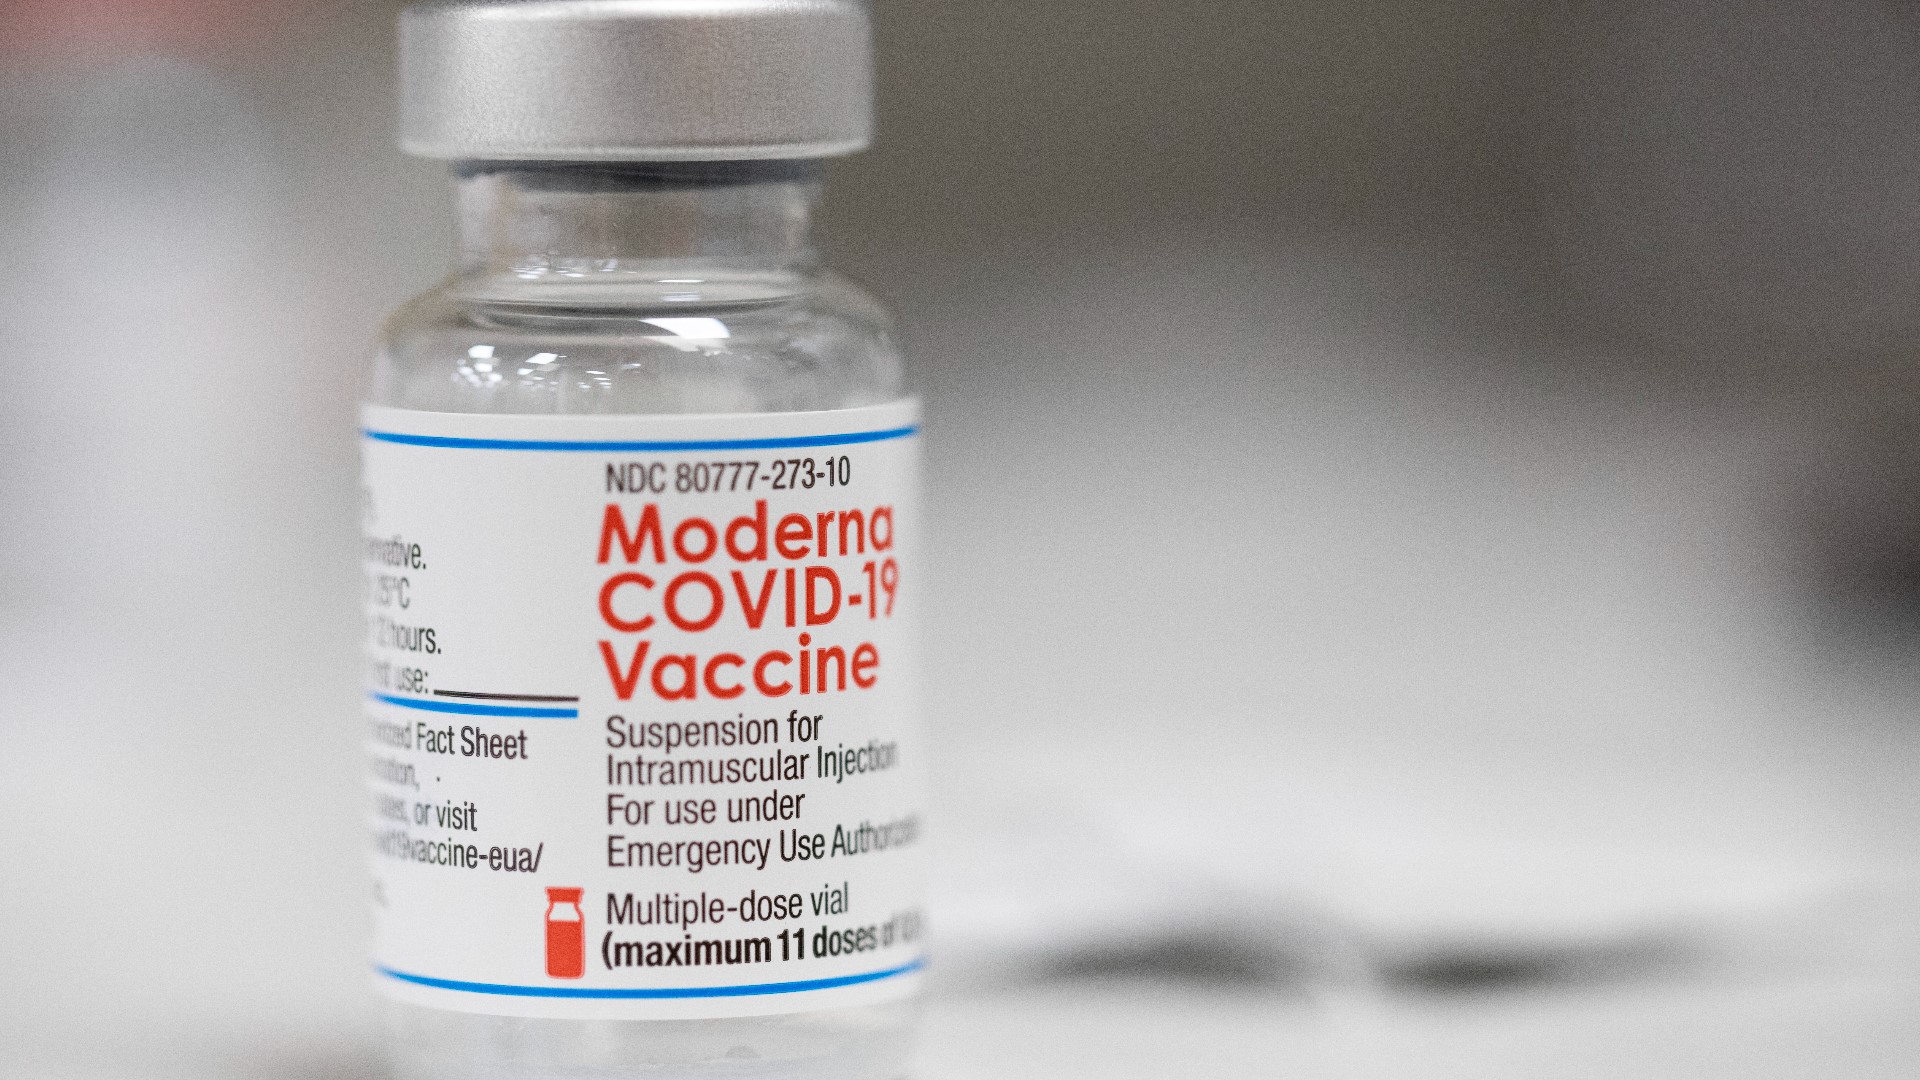 Moderna announced Monday that U.S. health regulators granted full approval to its COVID-19 vaccine.